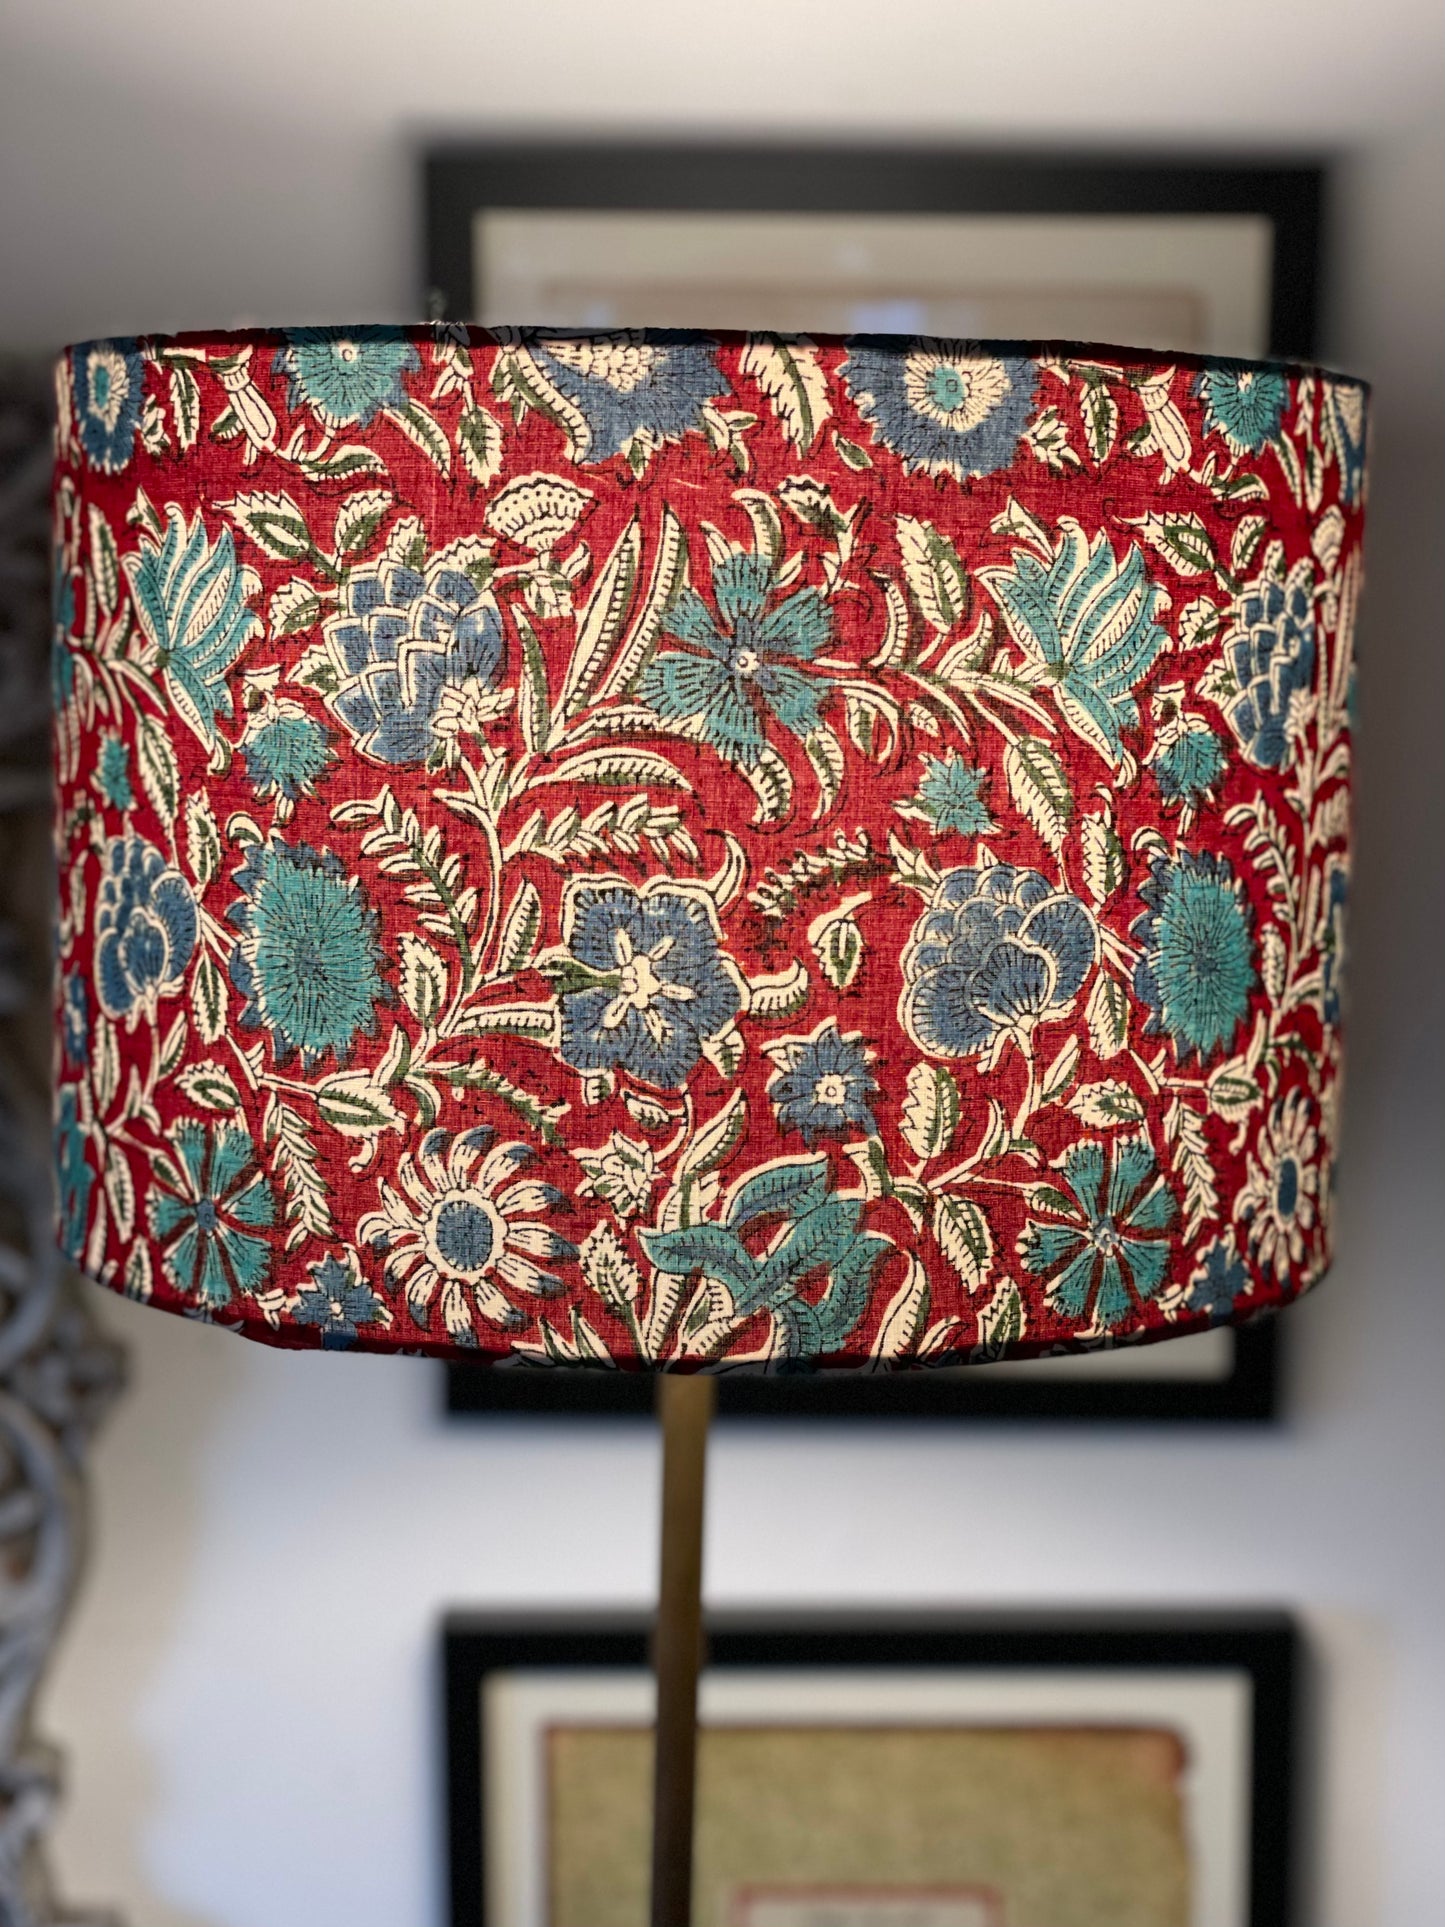 12 Inch Drum Shade. Sanganeri Hand Block Print from India. Crimson Red with Turquoise and Blue Floral Motif.